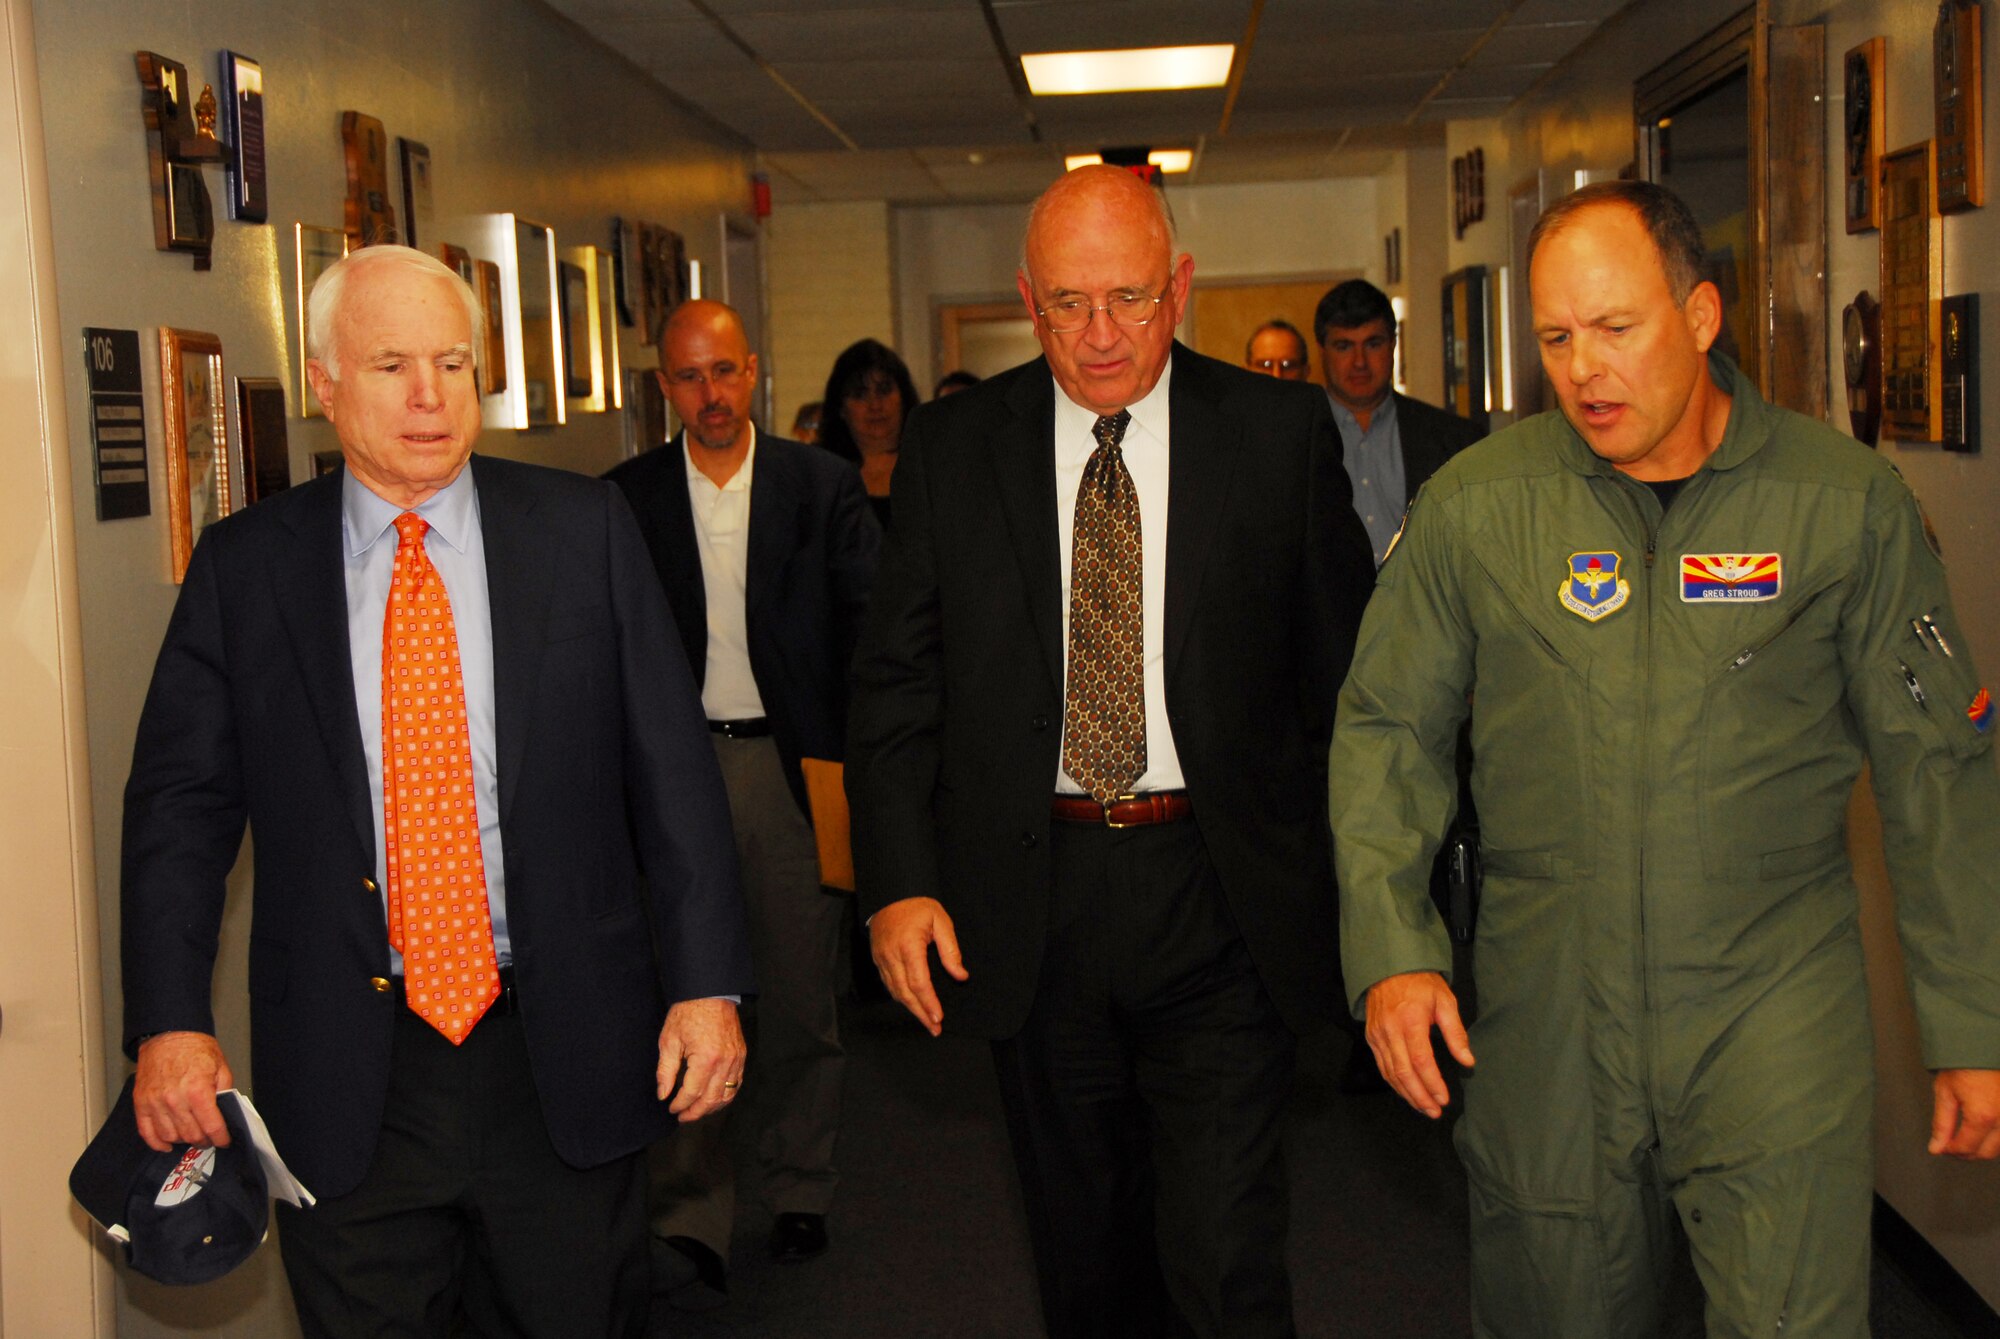 U.S. Senator John McCain, Tucson Mayor Bob Walkup, and Col. Greg Stroud, 162nd Fighter Wing commander, head to a news conference Nov. 24 at the Arizona Air National Guard base at Tucson International Airport.  Senator McCain visited to show support for the wing and its future.  (U.S Air Force photo by Master Sgt. David Neve)